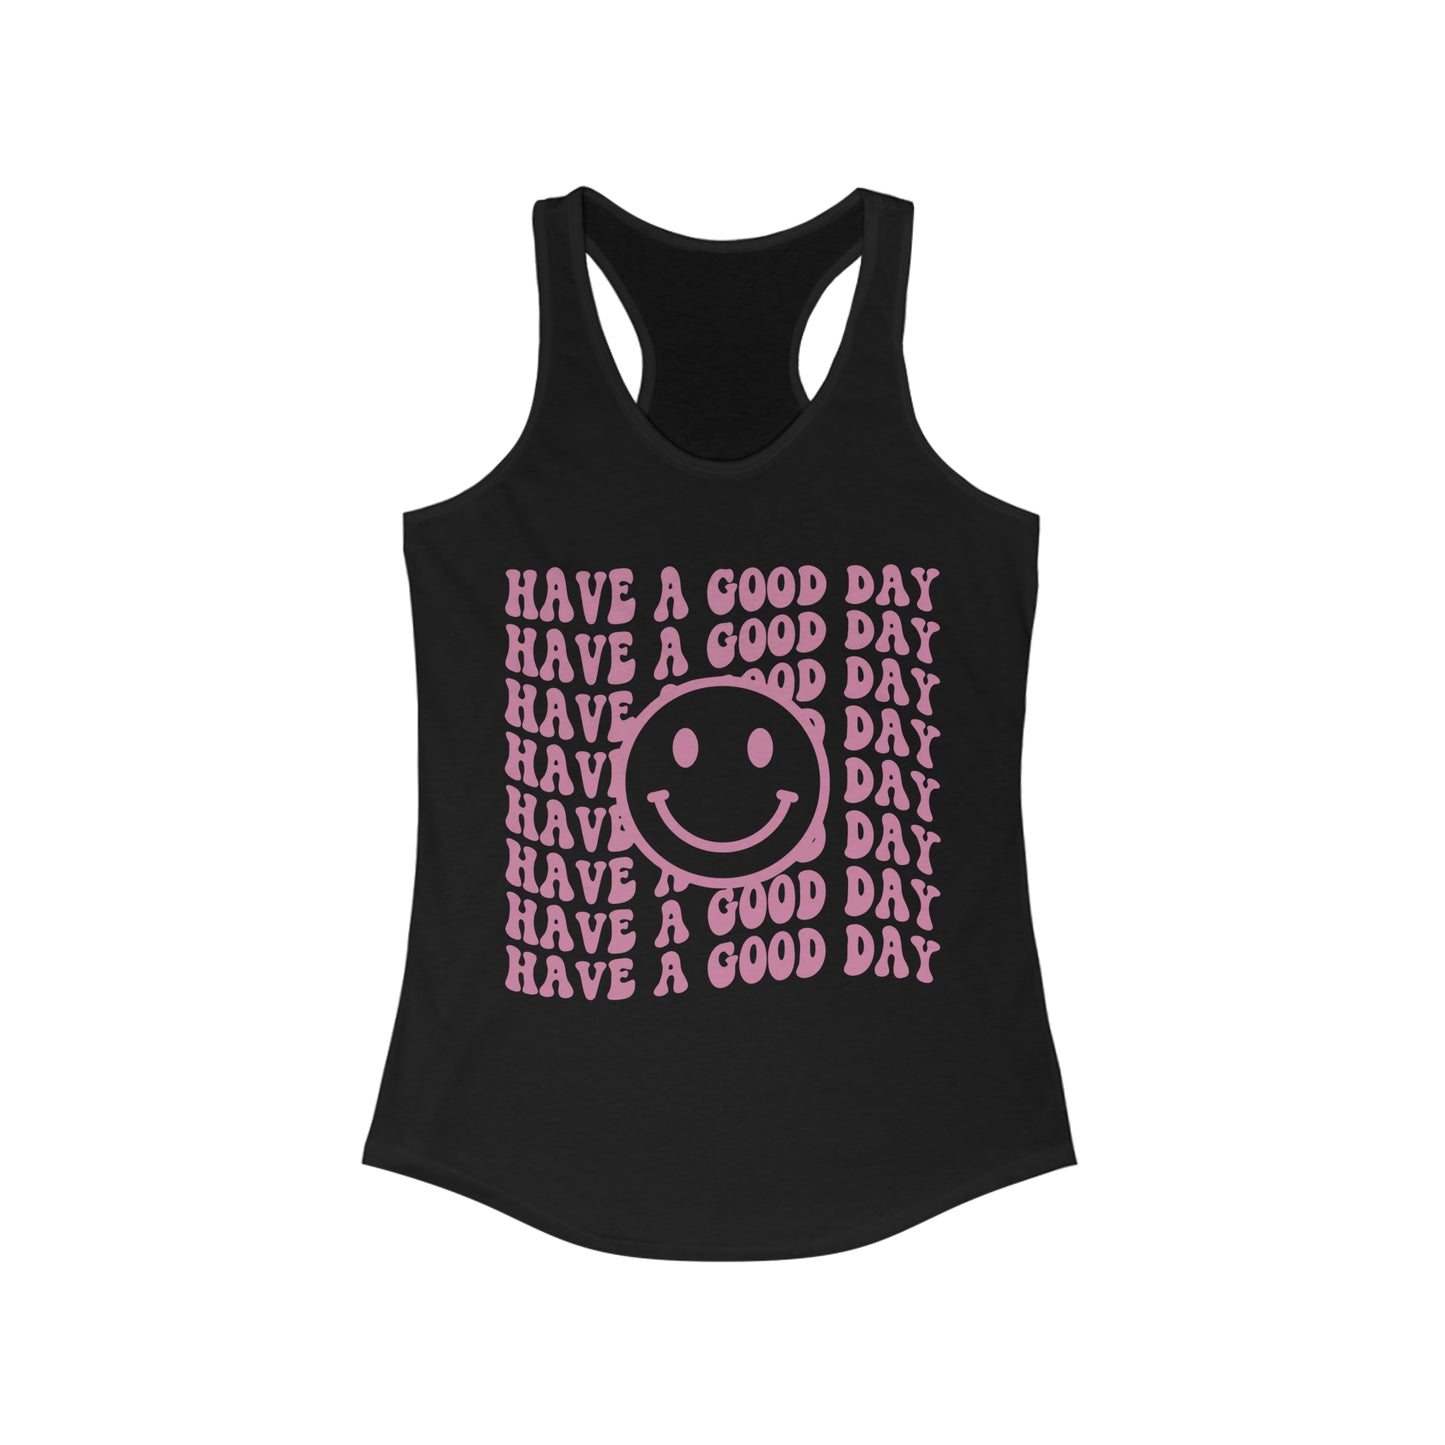 Have a Good Day - Women's Ideal Racerback Tank